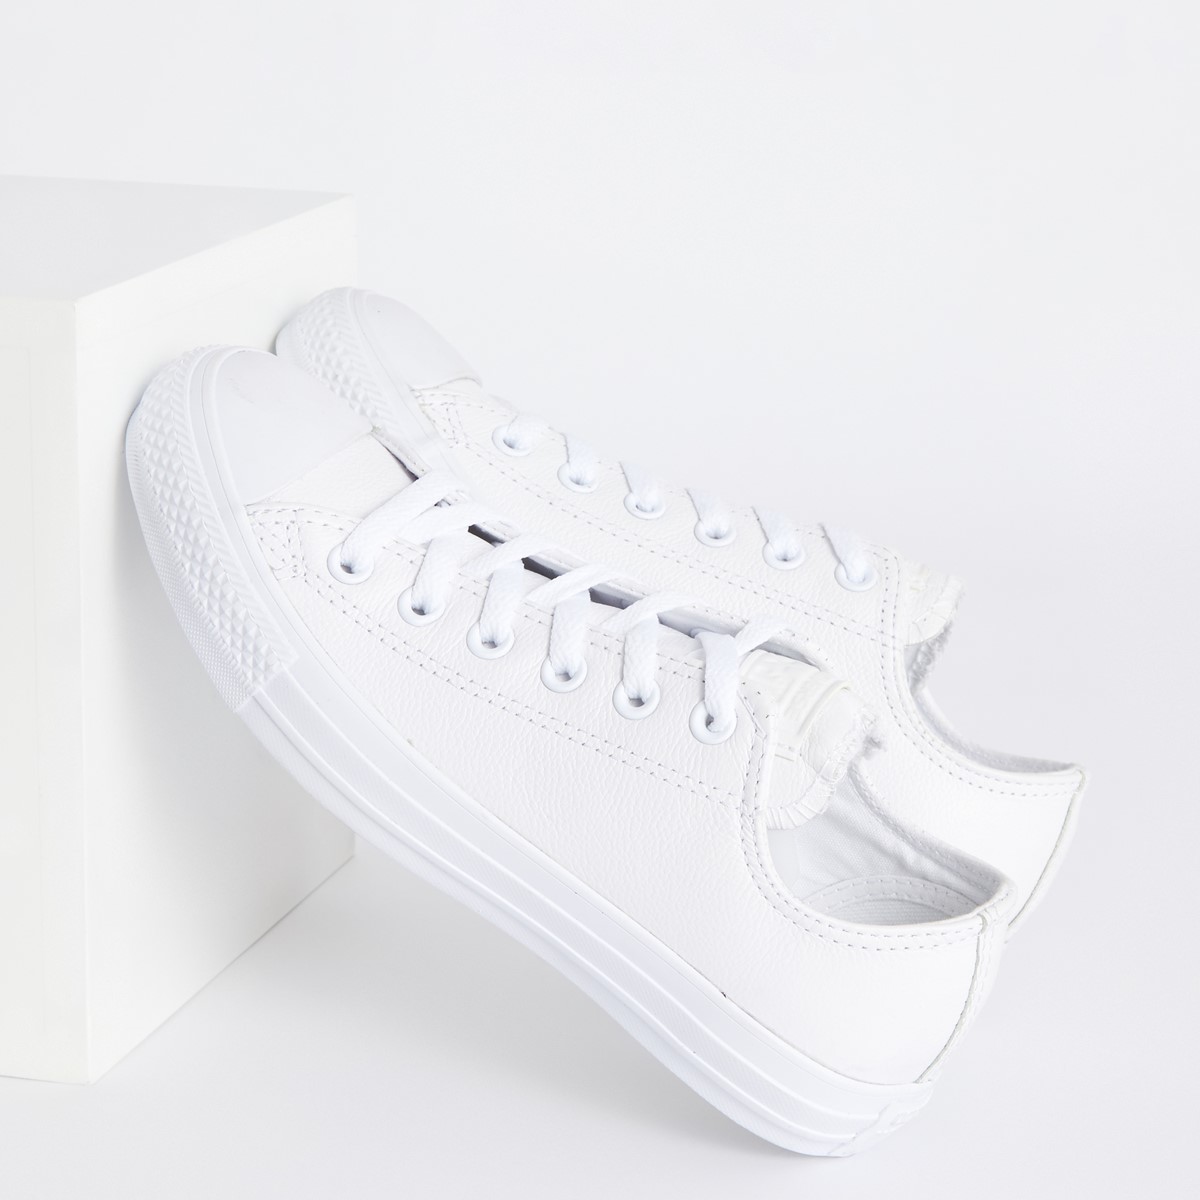 white leather converse size 5.5